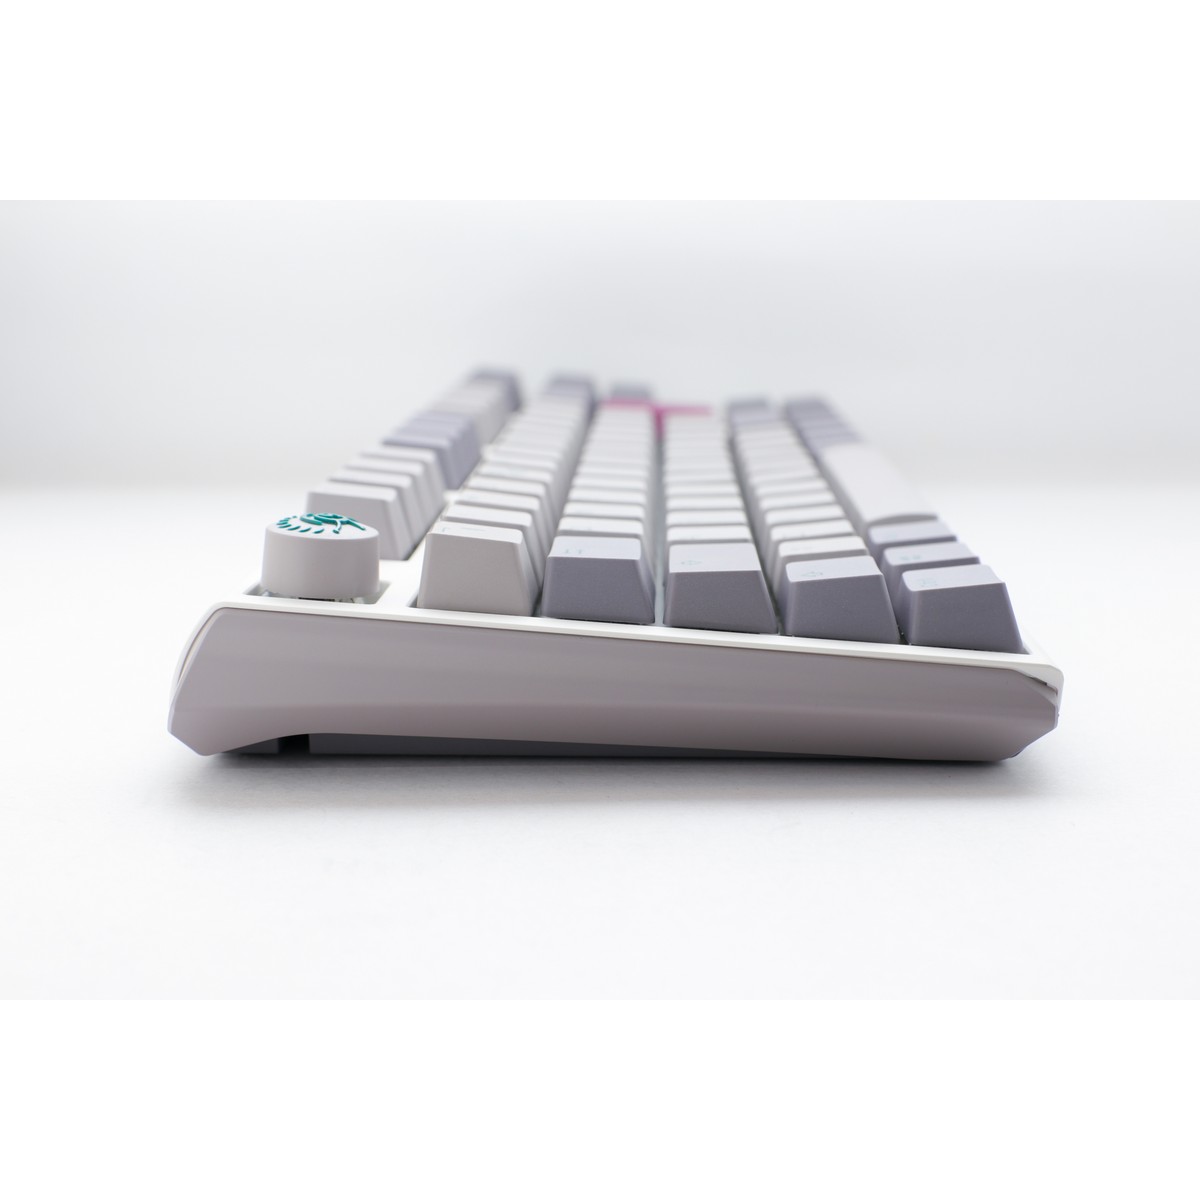 Ducky - Ducky One 3 Mist USB RGB Mechanical Gaming Keyboard Cherry MX Brown Switch - UK Layout